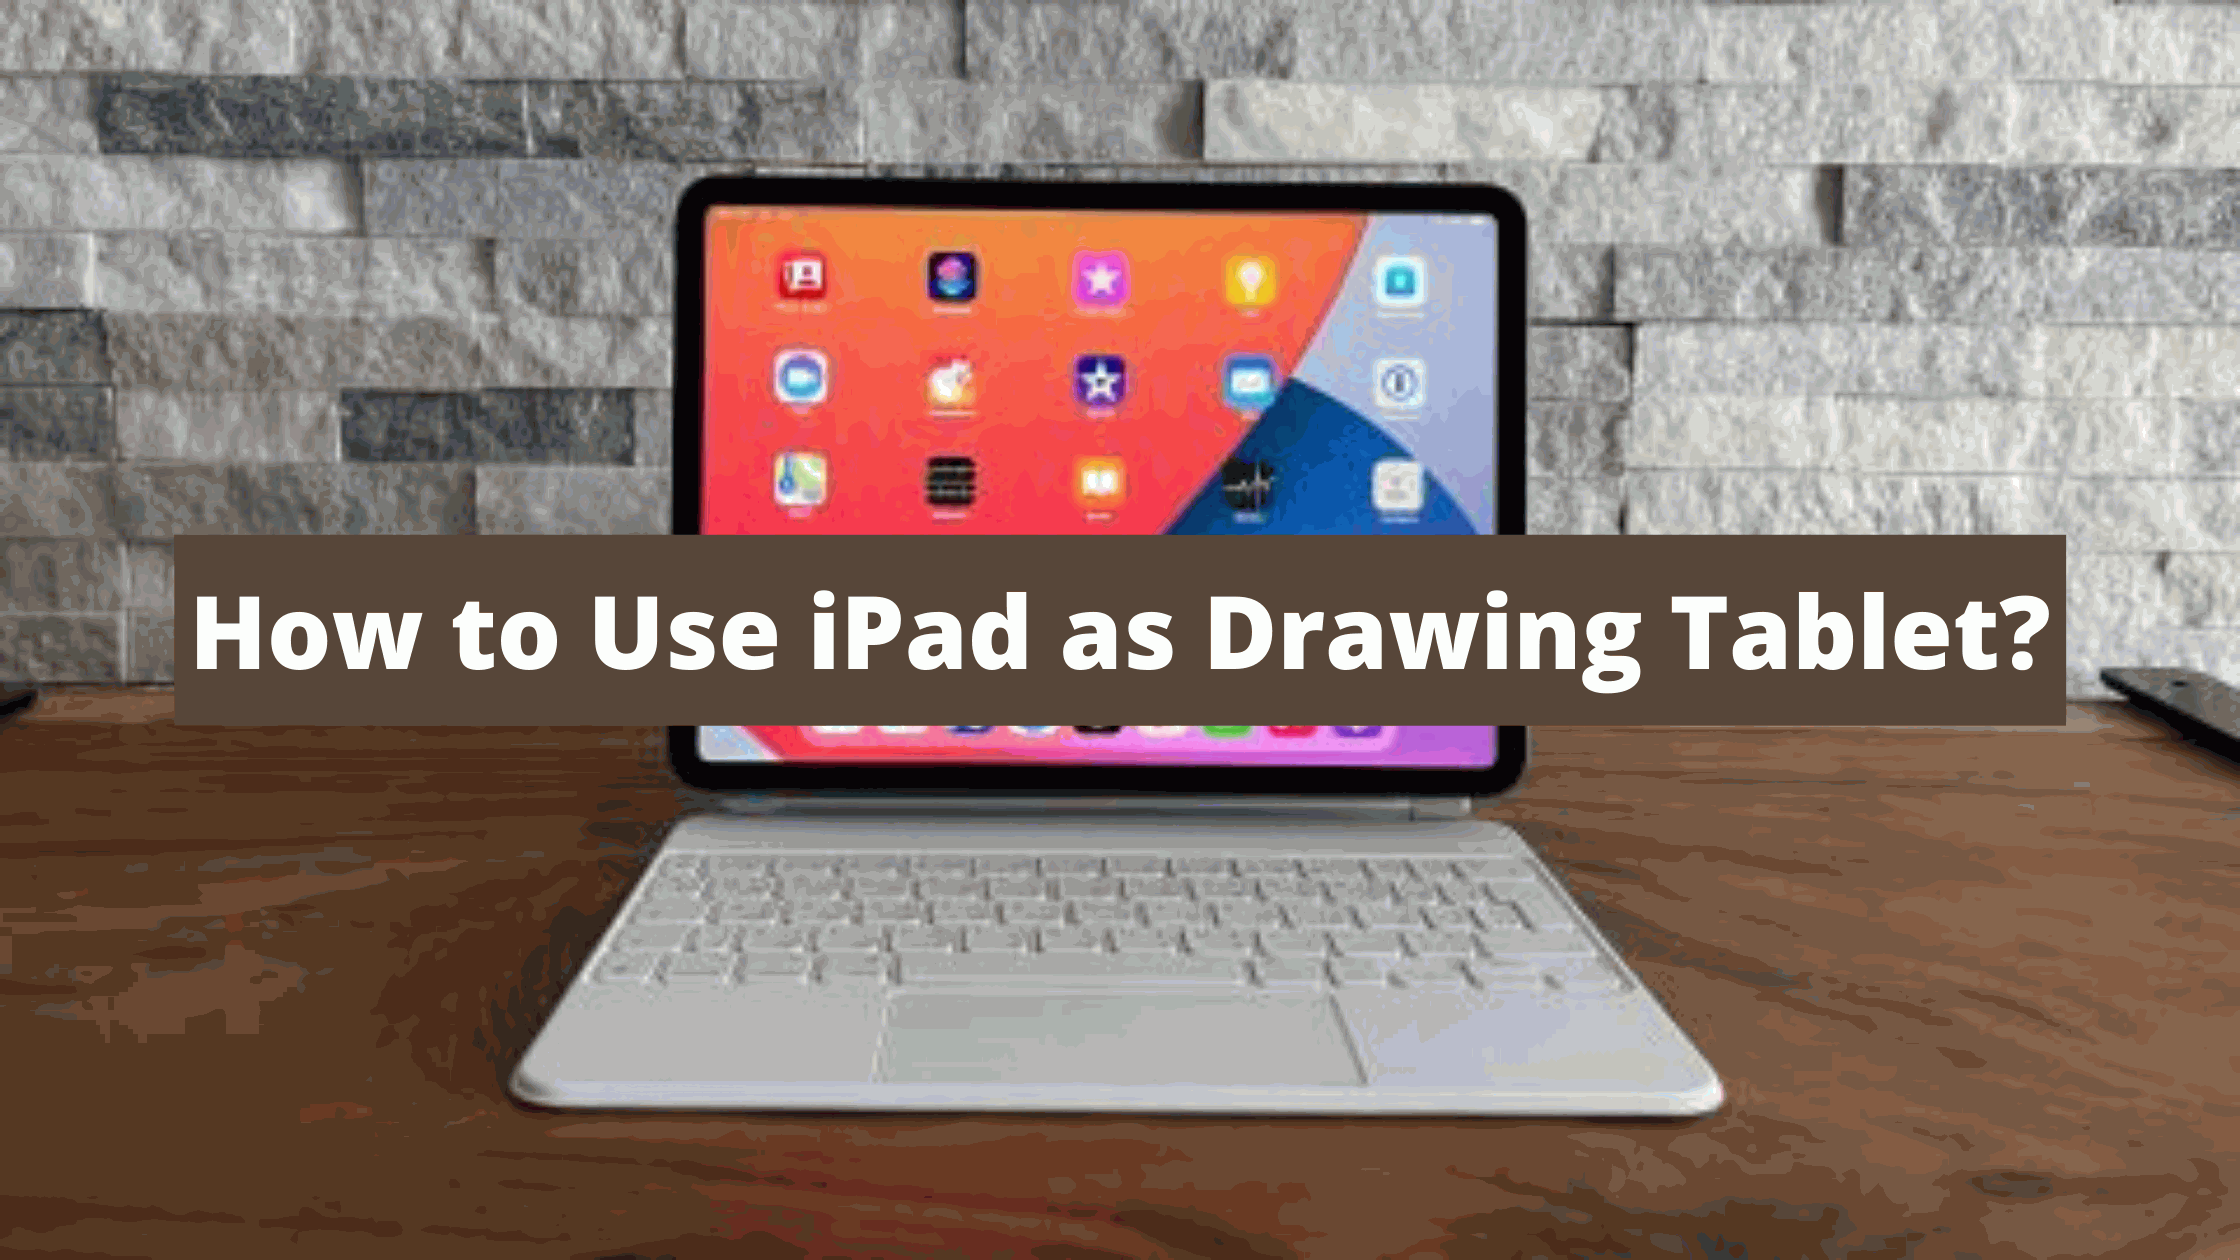 How to Use iPad as Drawing Tablet